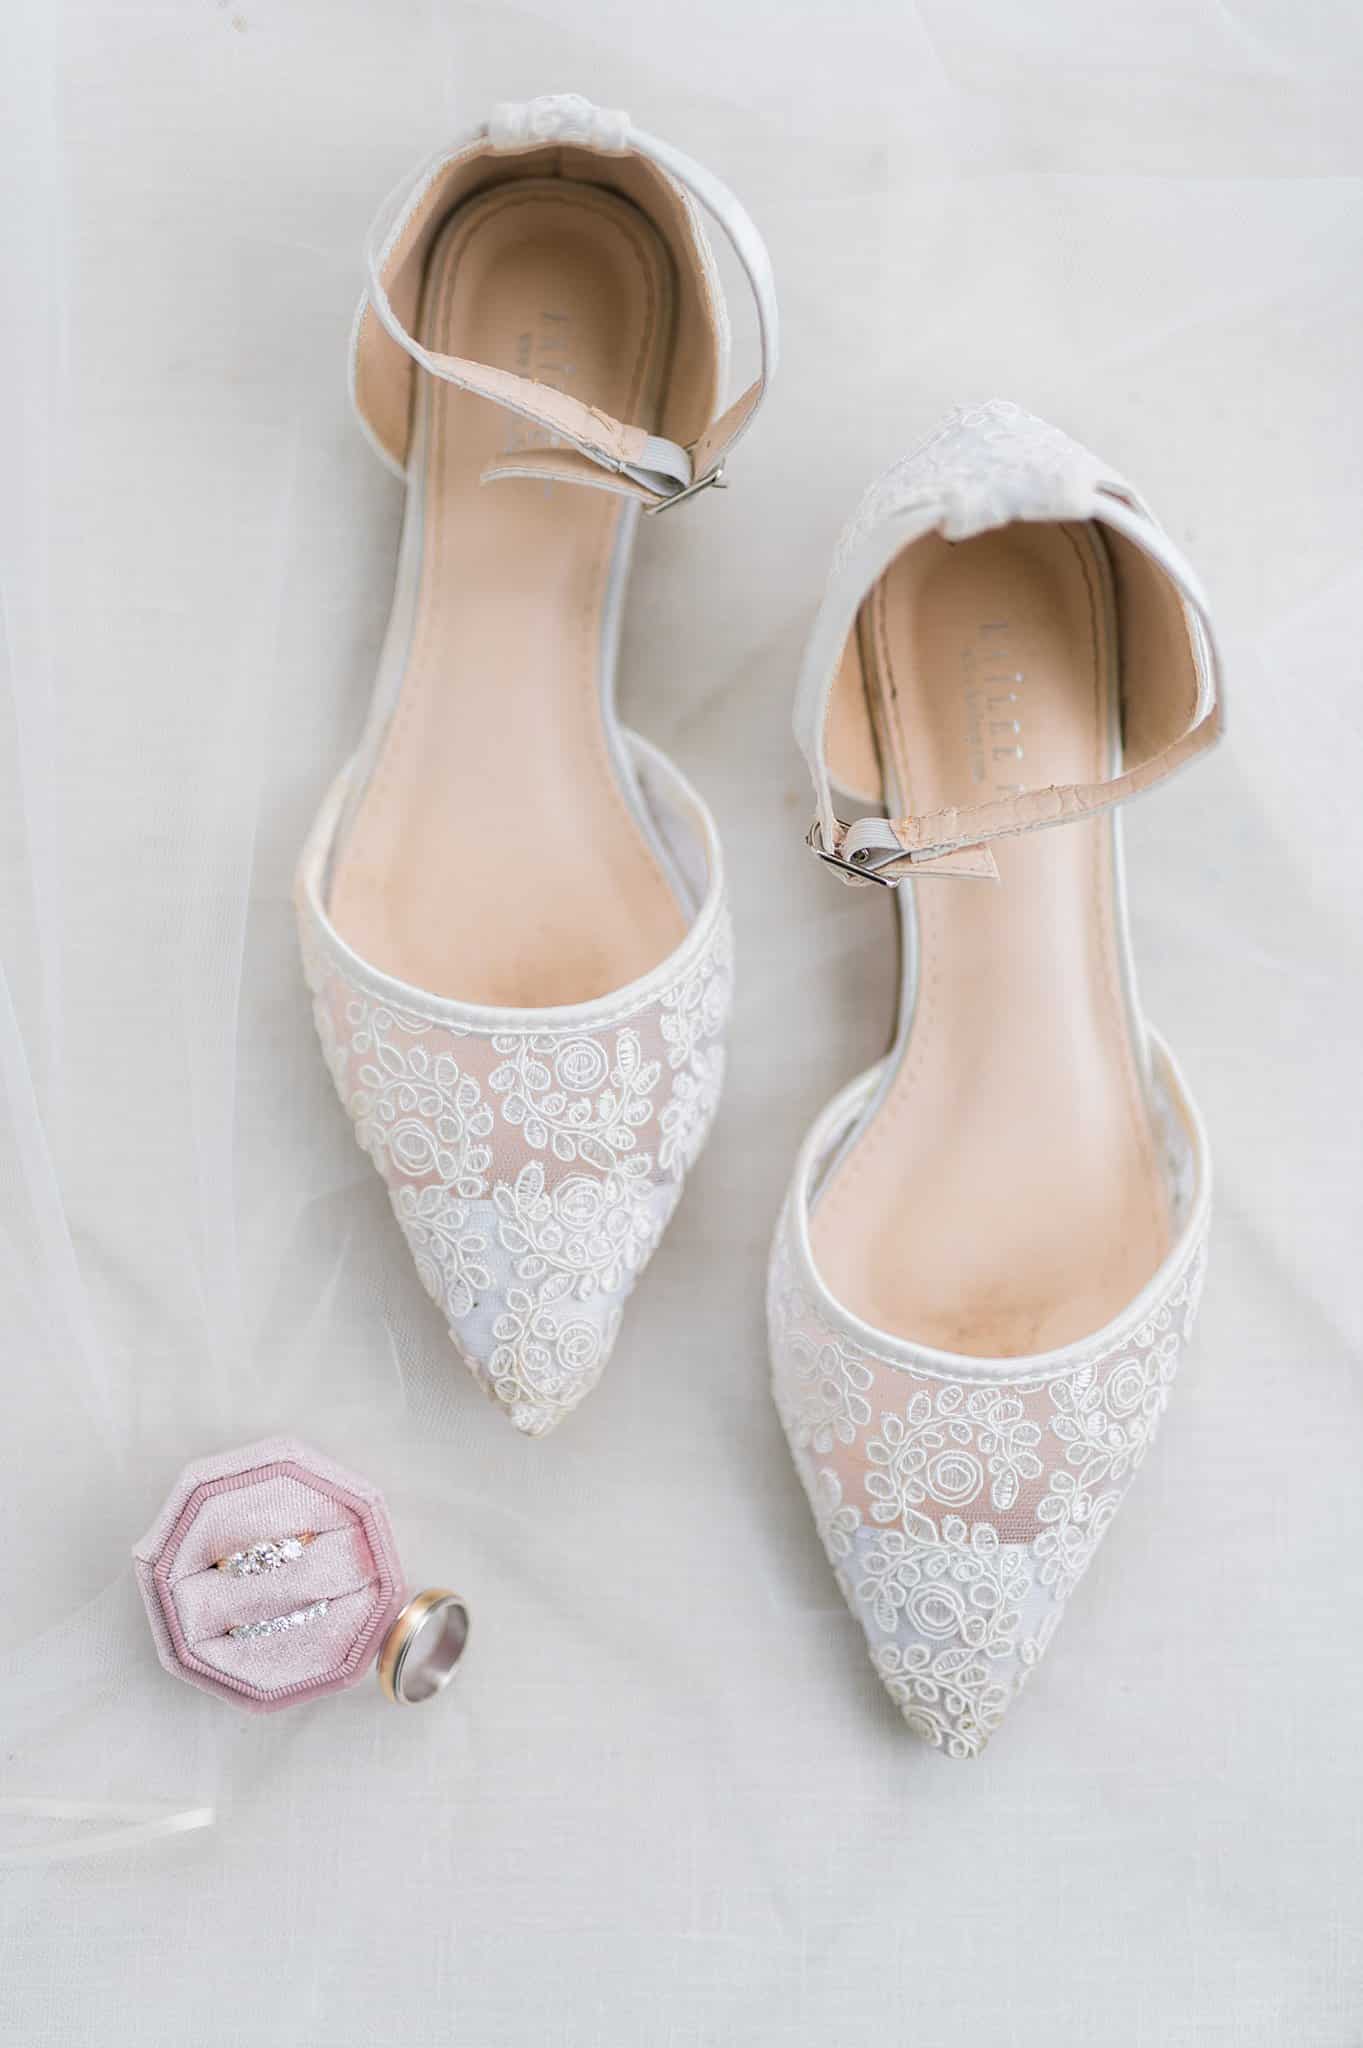 Bridal Shoes and Rings